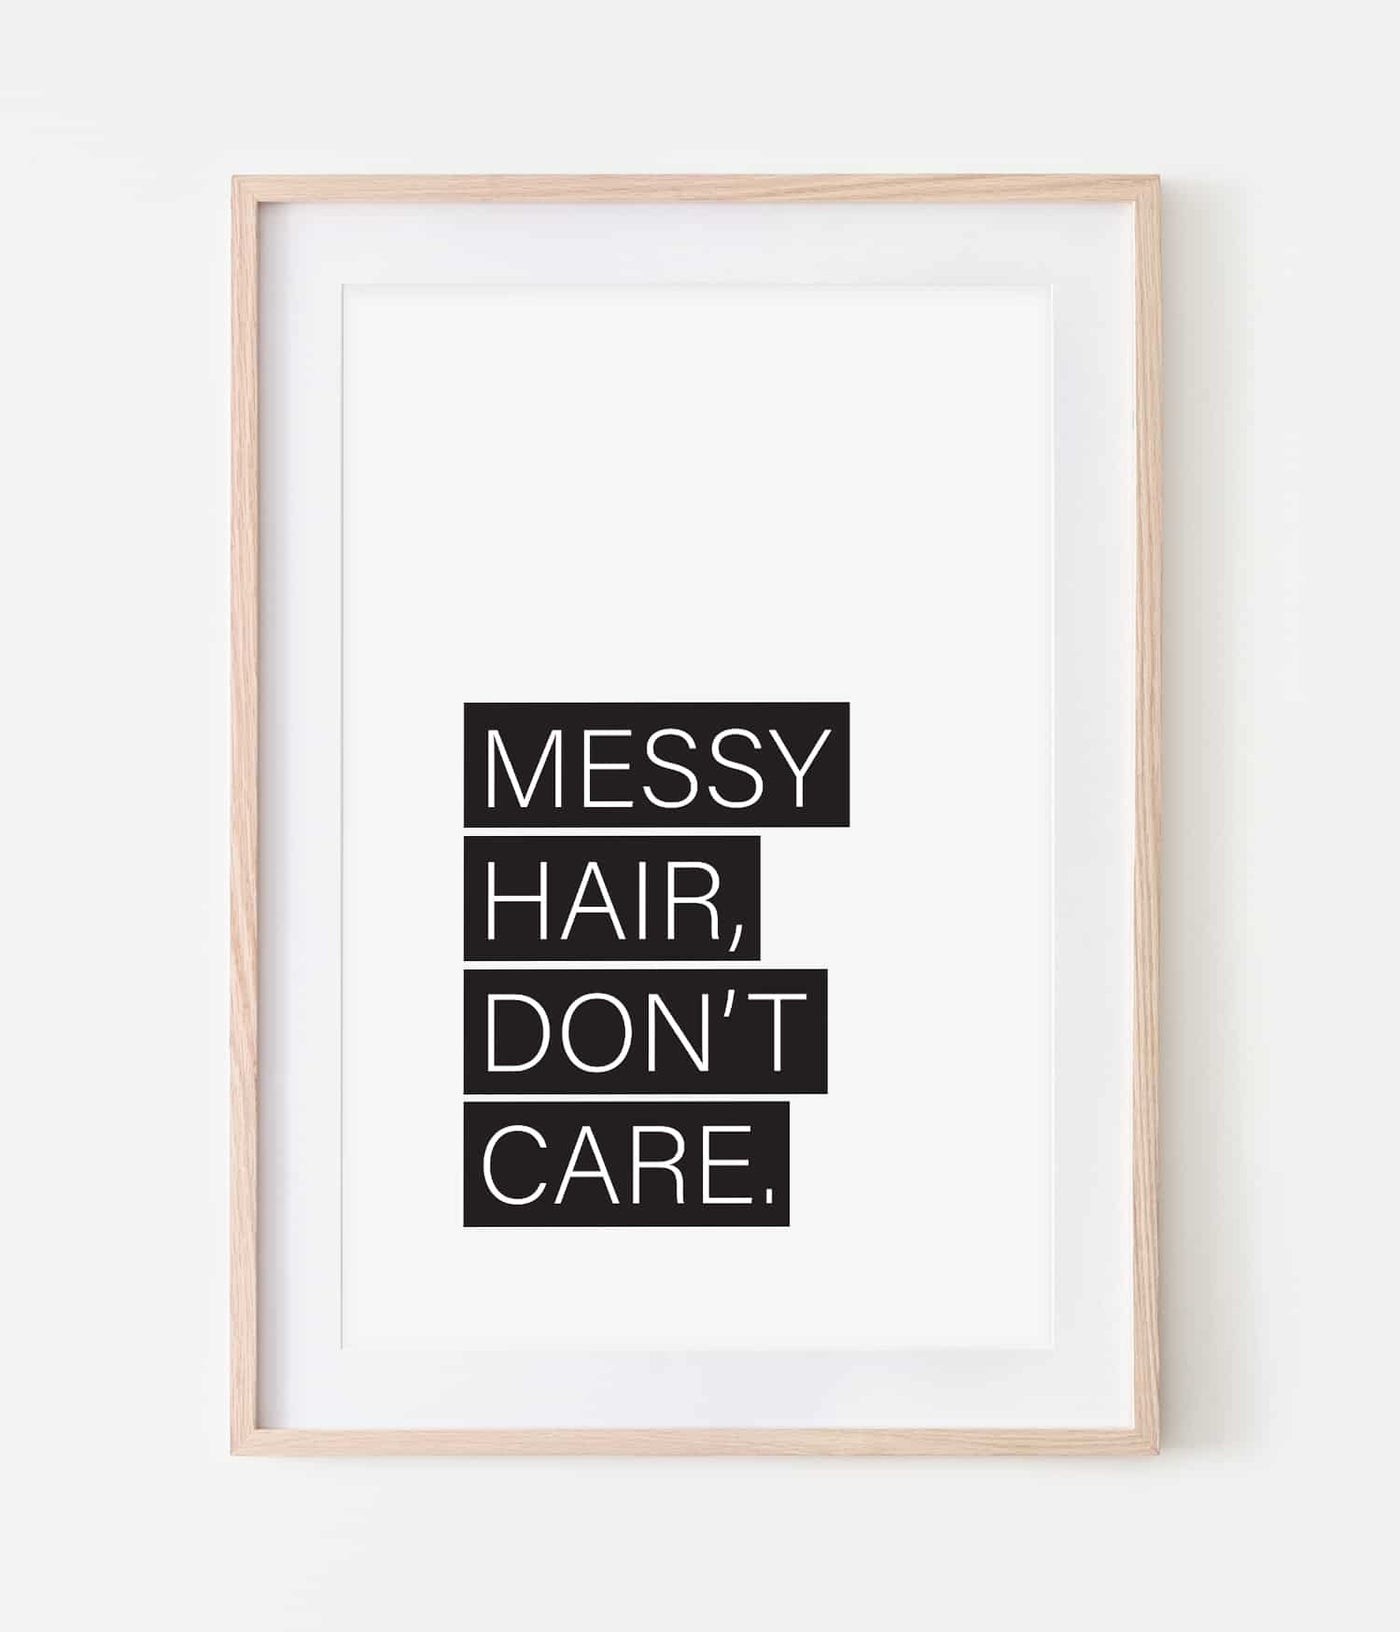 'Messy hair, don't care.' Print